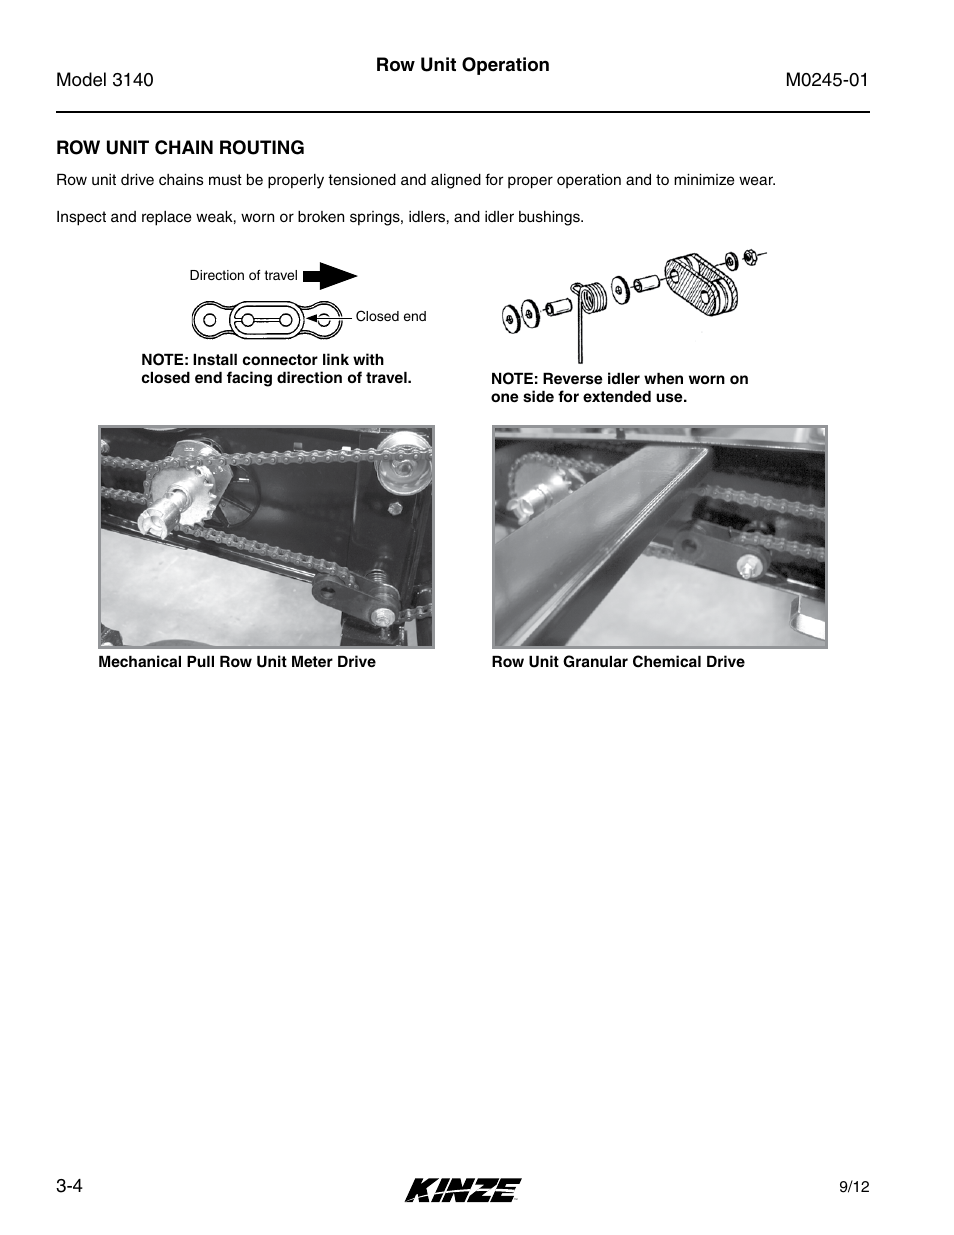 Row unit chain routing, Row unit chain routing -4 | Kinze 3140 Stack Fold Planter Rev. 7/14 User Manual | Page 42 / 150